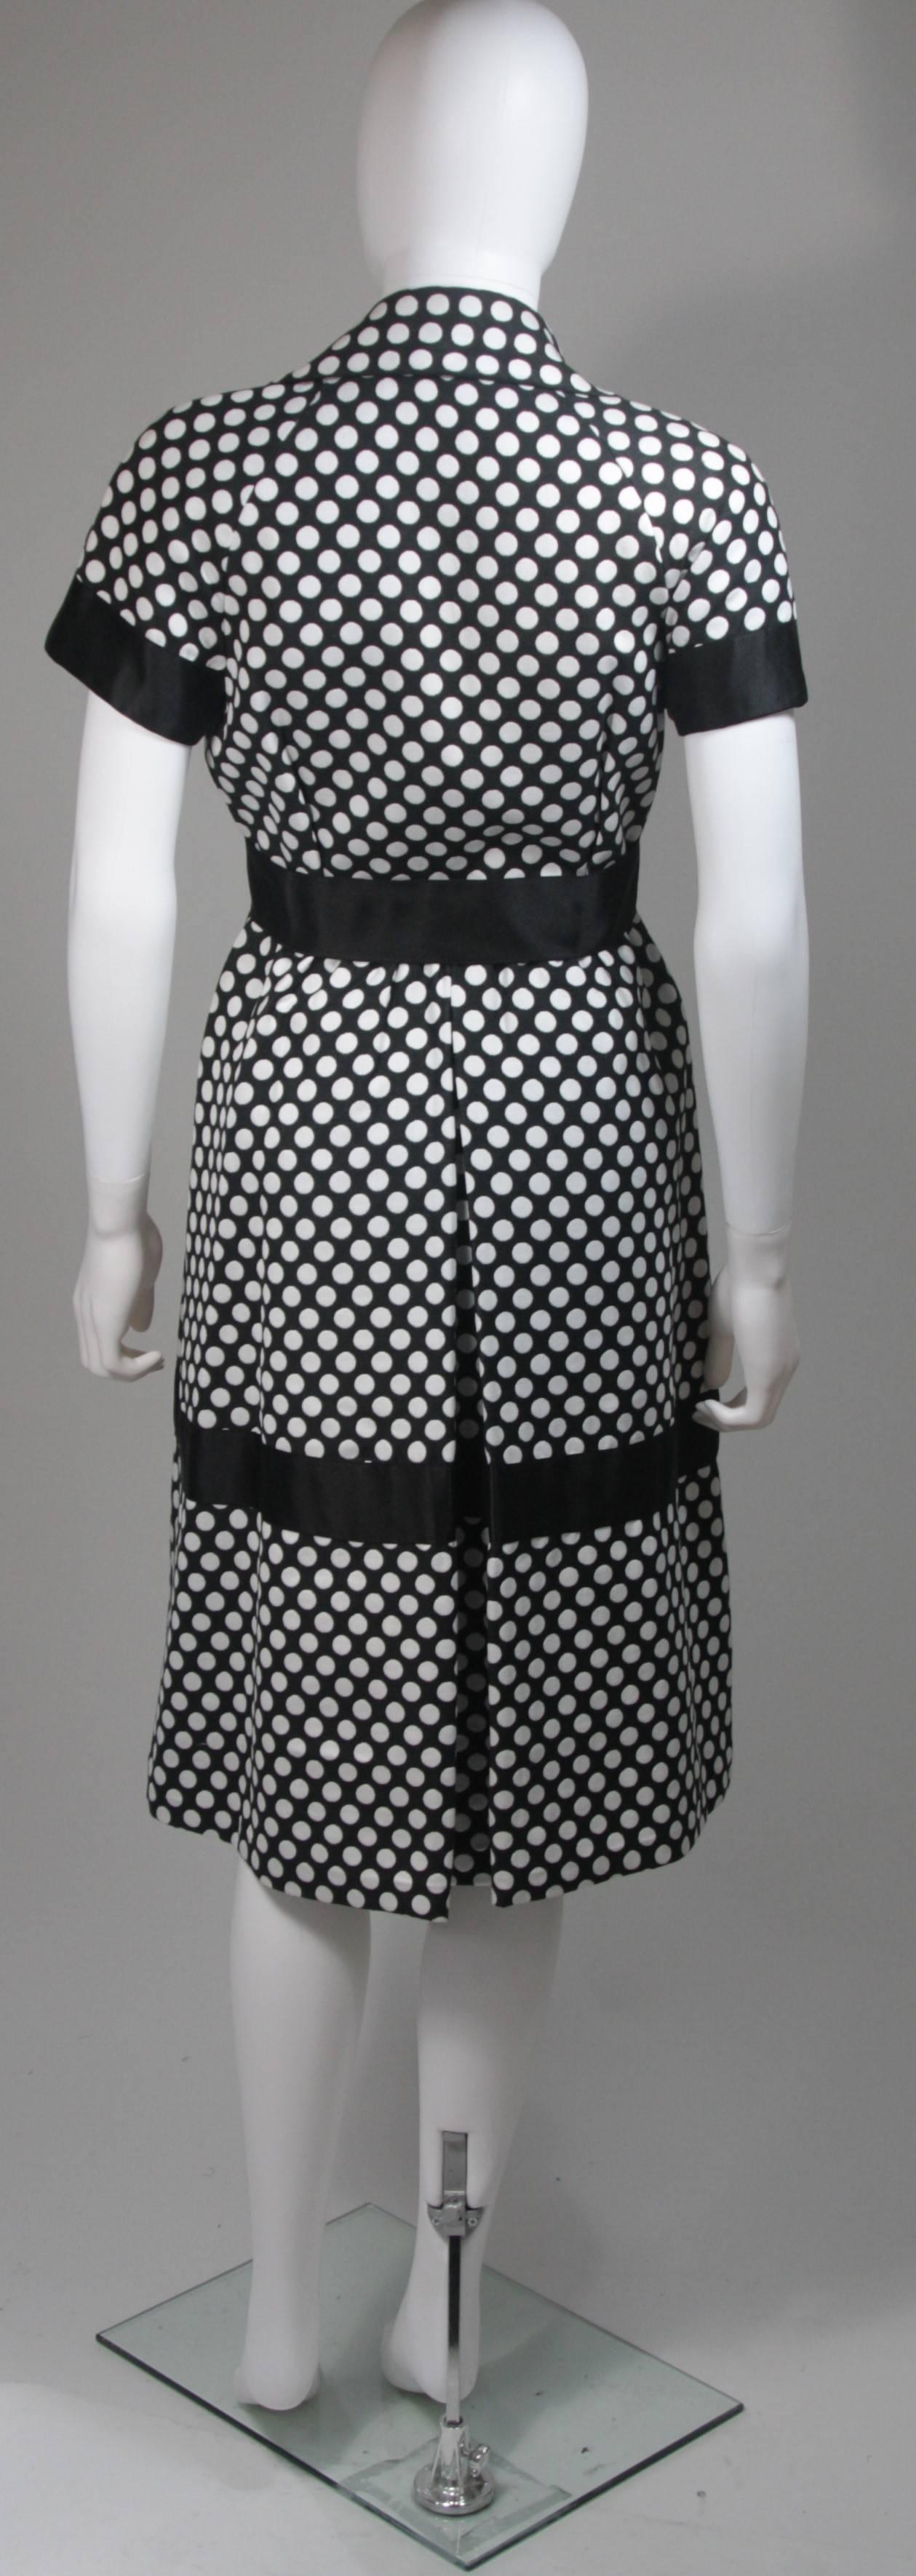 Geoffrey Beene Black and White Polka Dot Dress with Satin Trim Size Small 5